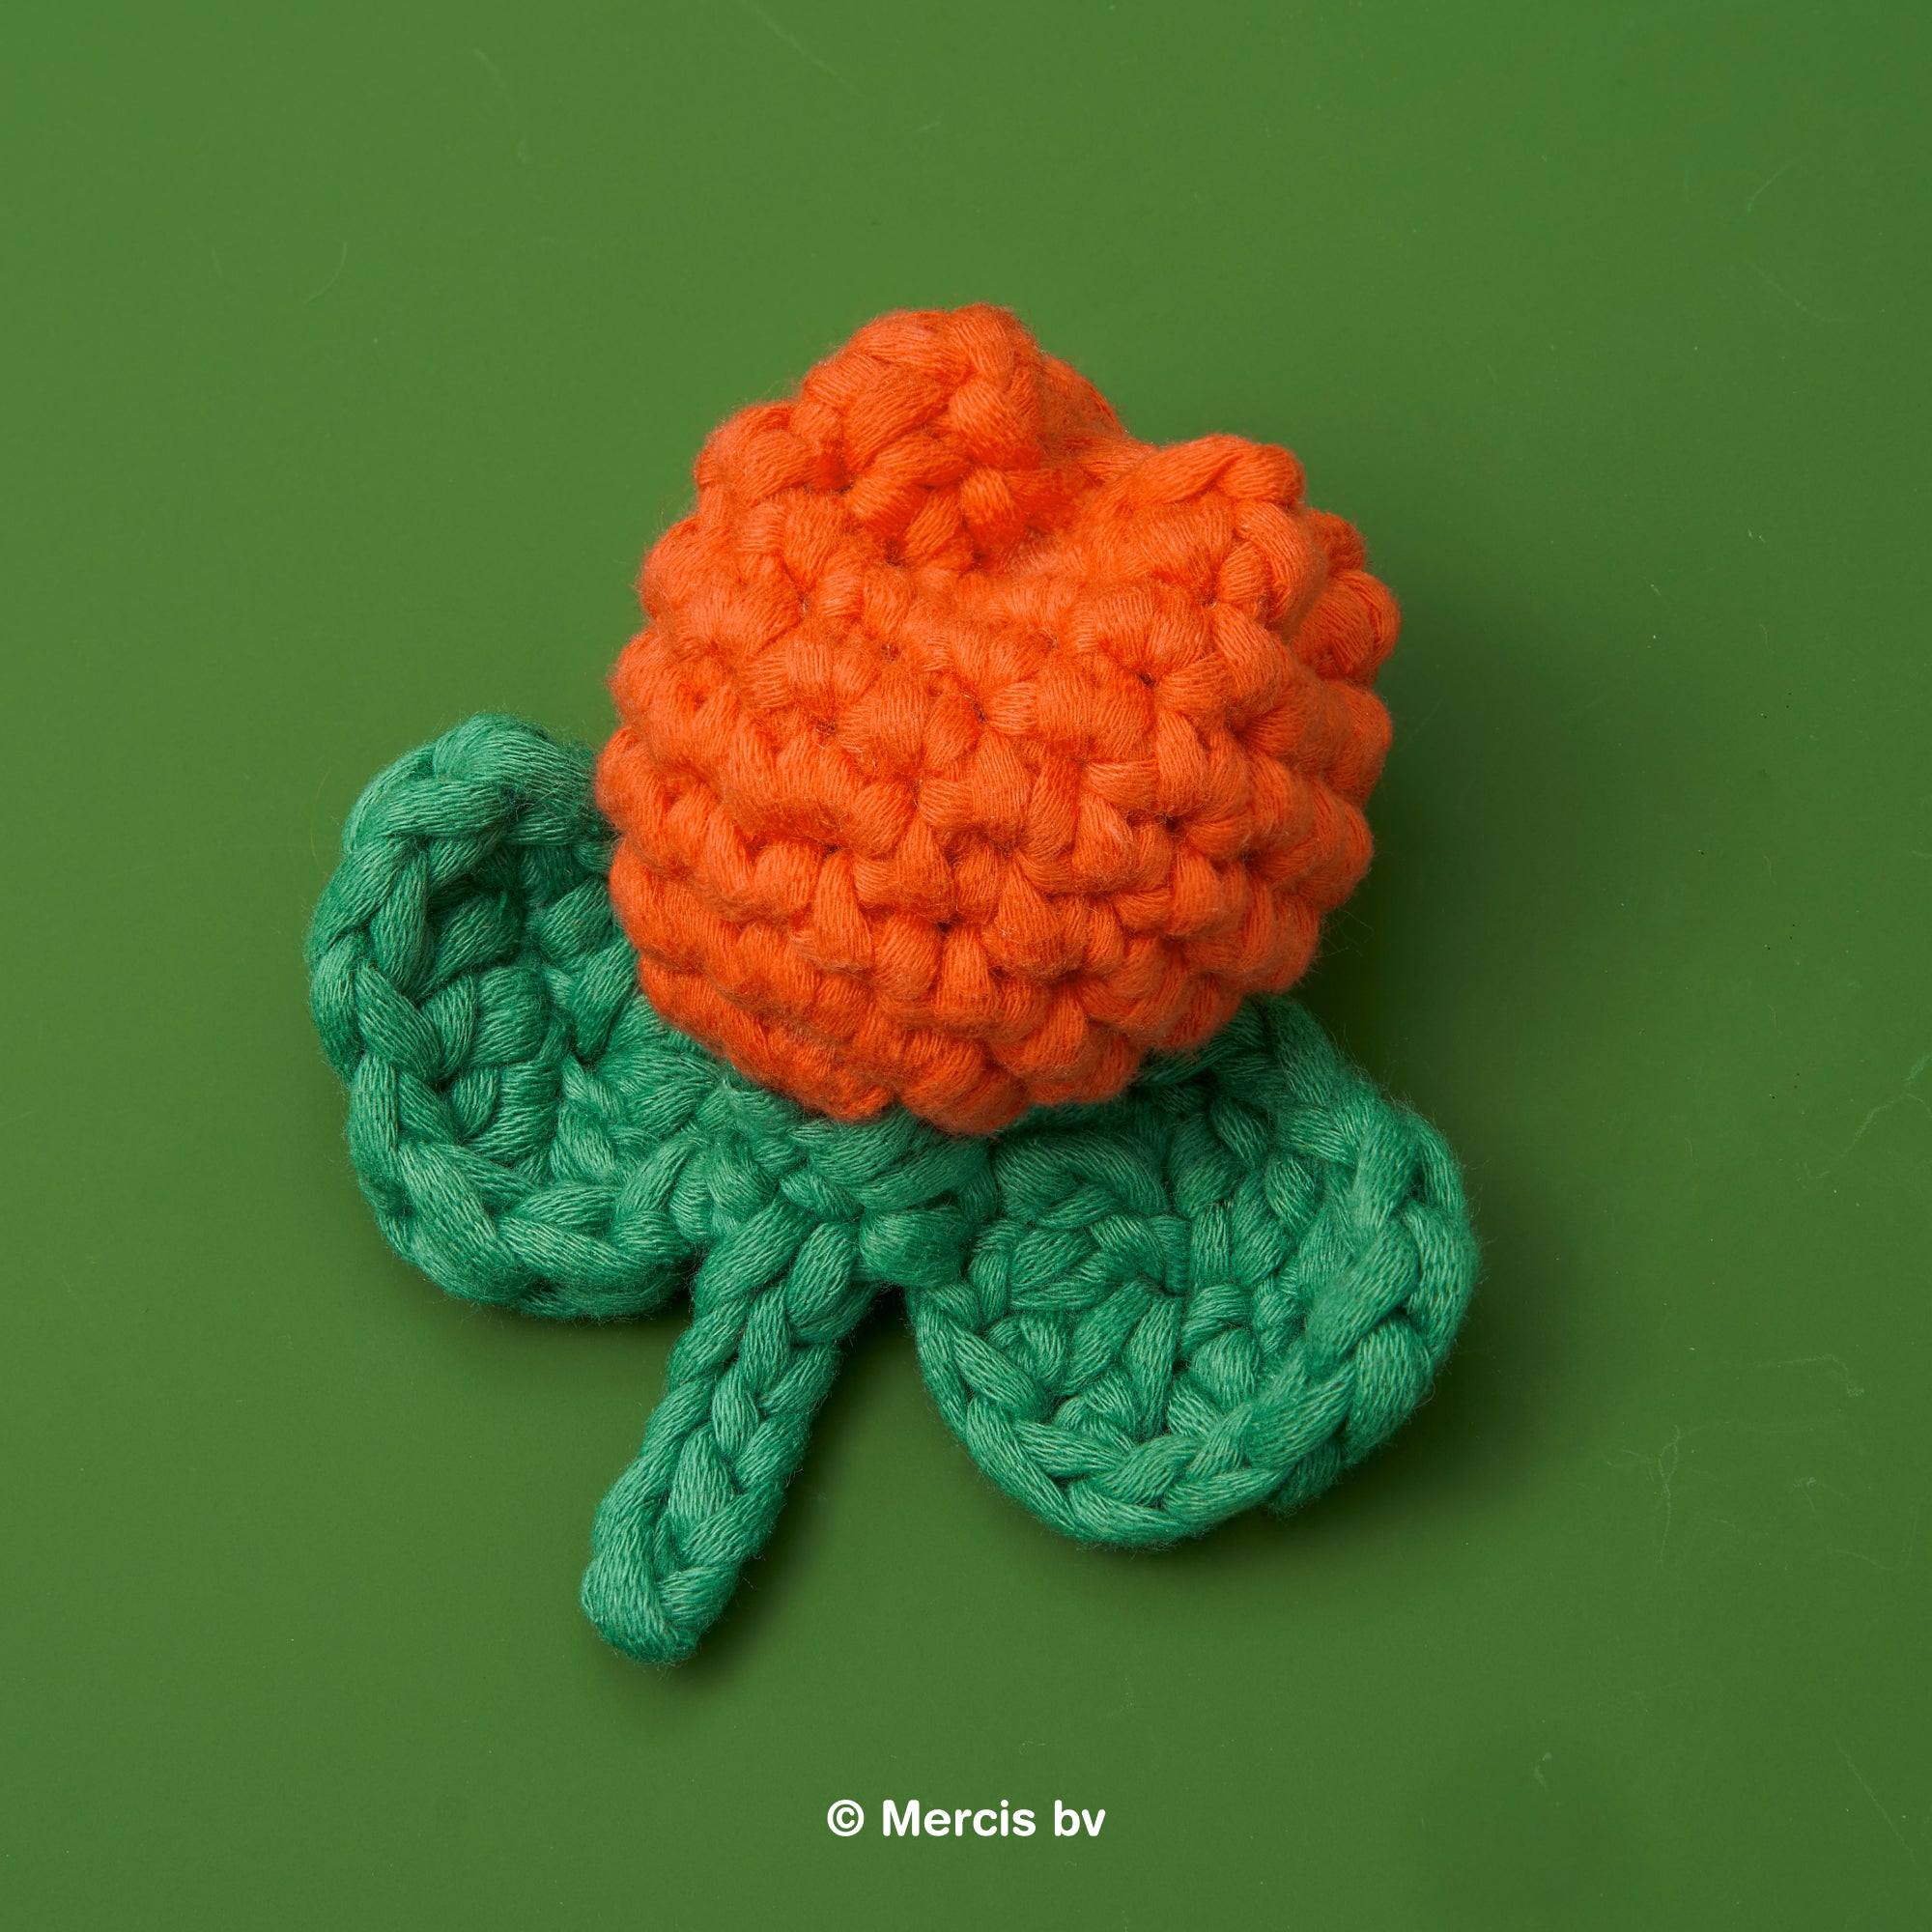 The Woobles' Miffy Crochet Kit Full Review With Photos